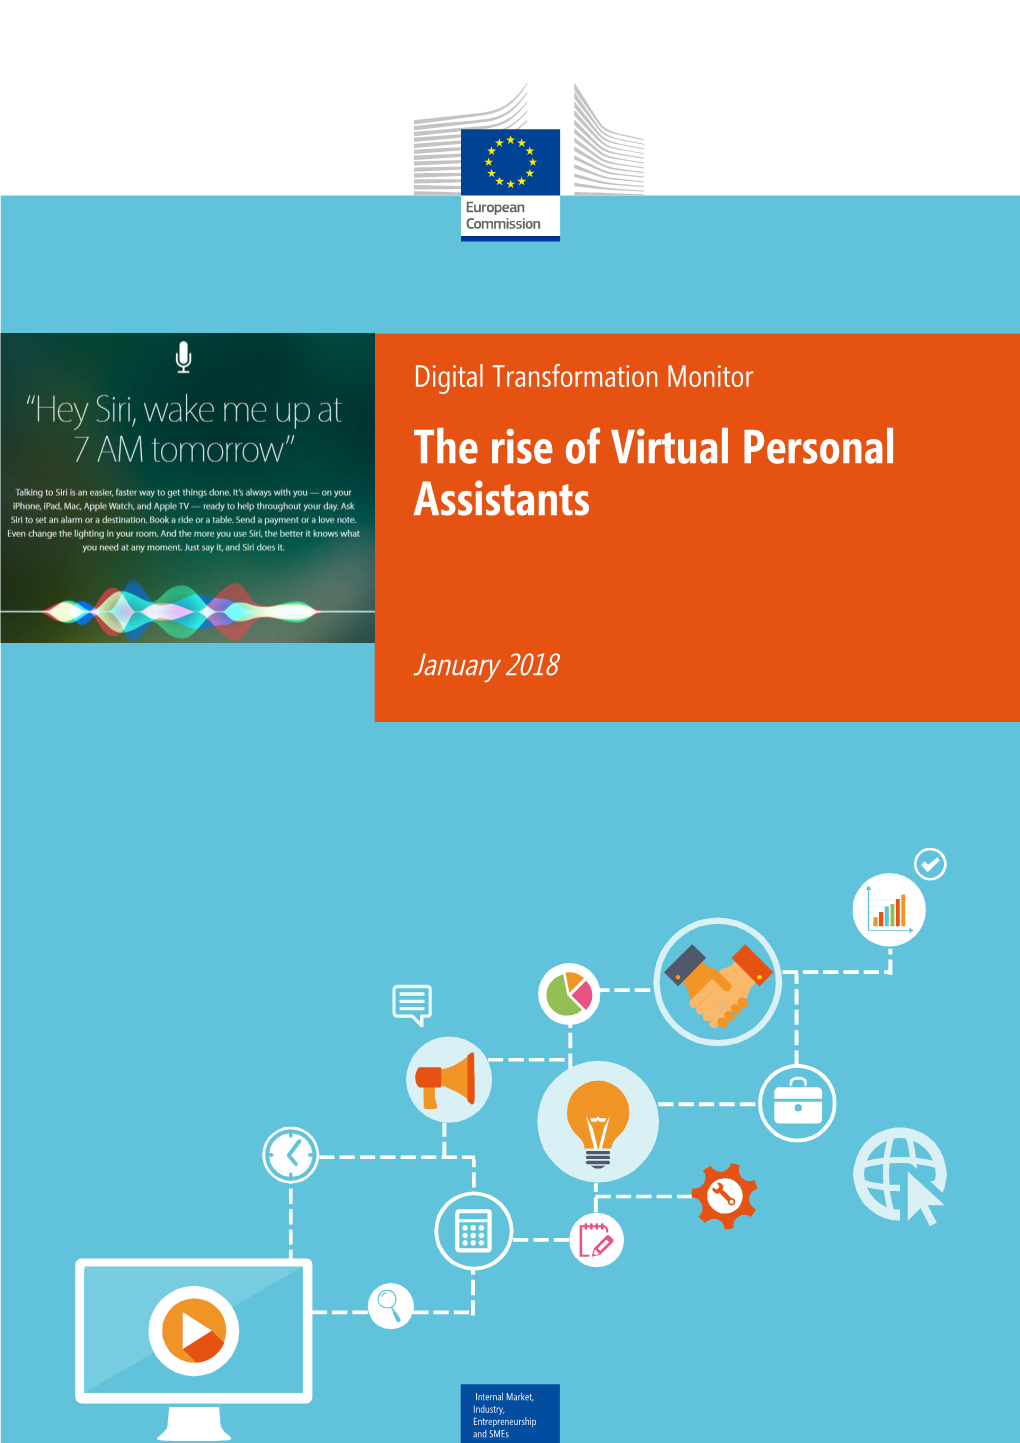 The Rise of Virtual Personal Assistants